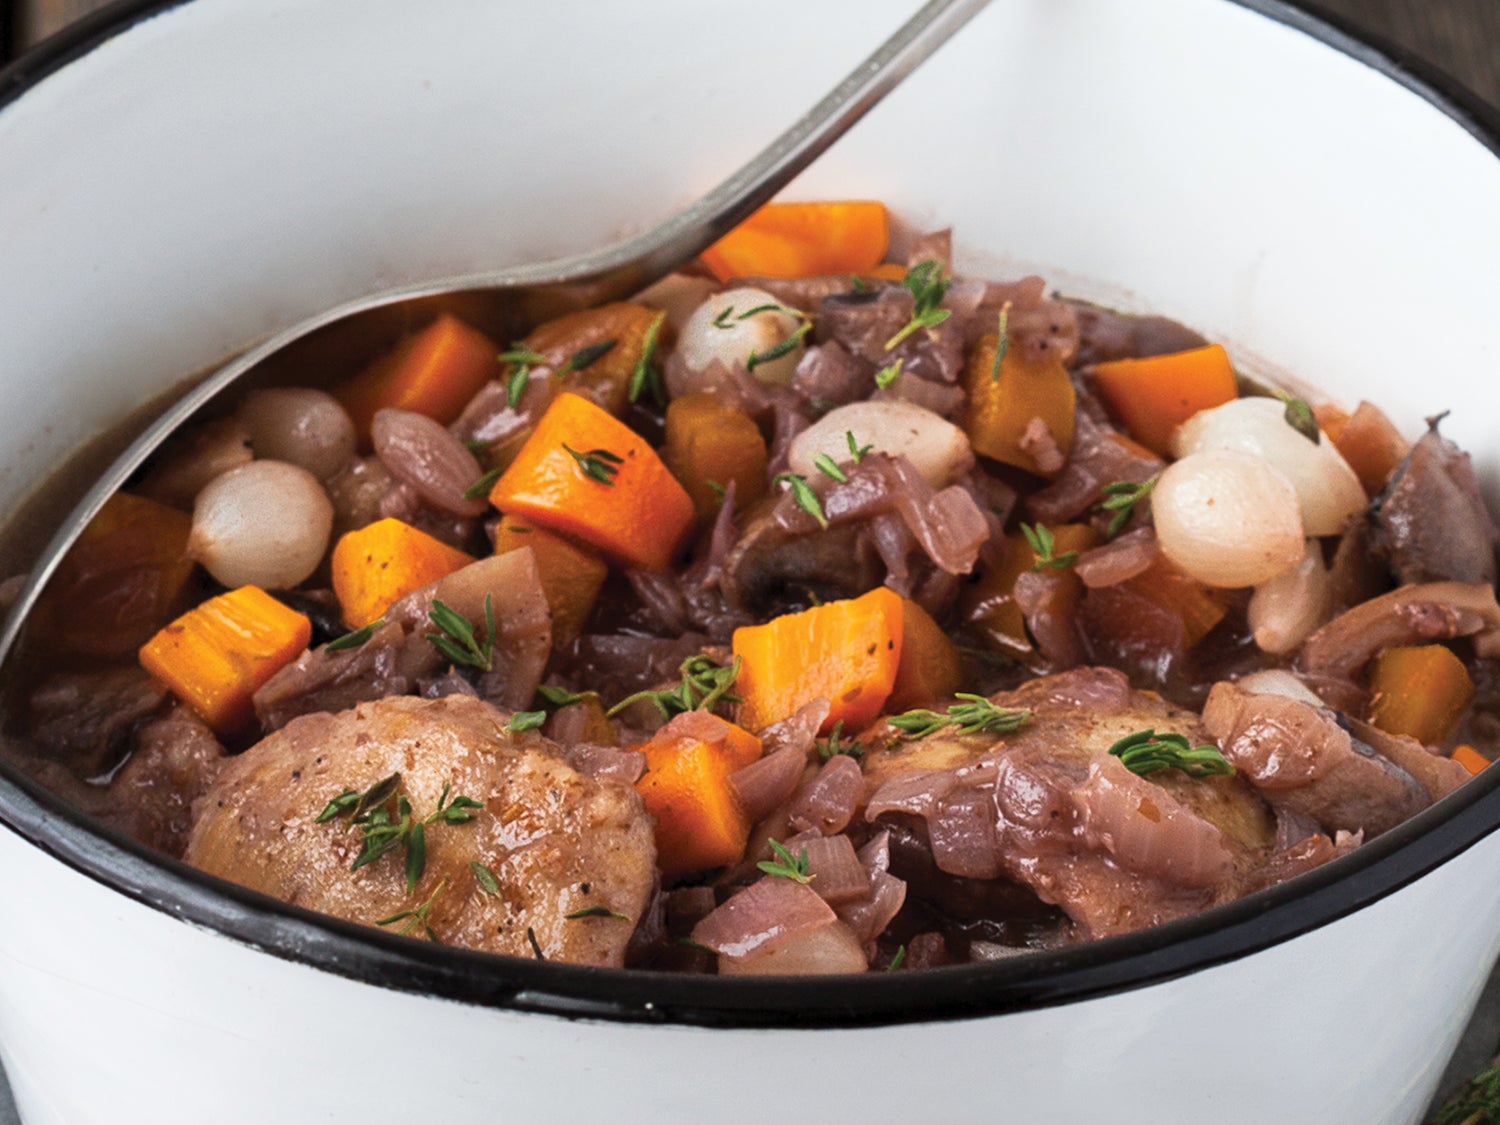 An Awesome French Chicken Stew Recipe - Chicken Bourguignon